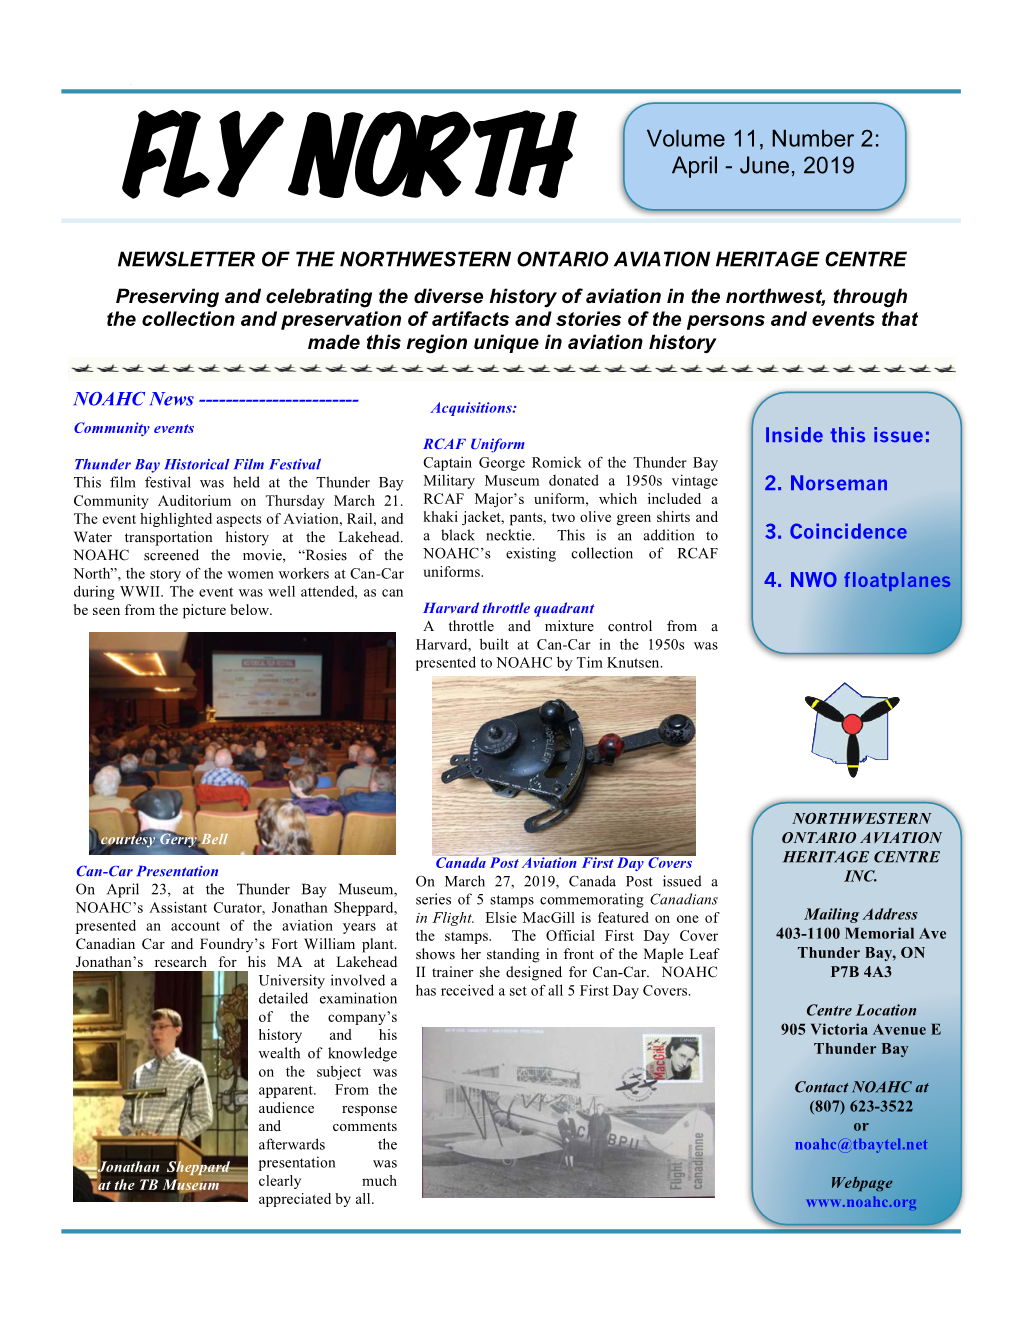 FLY NORTH April - June, 2019